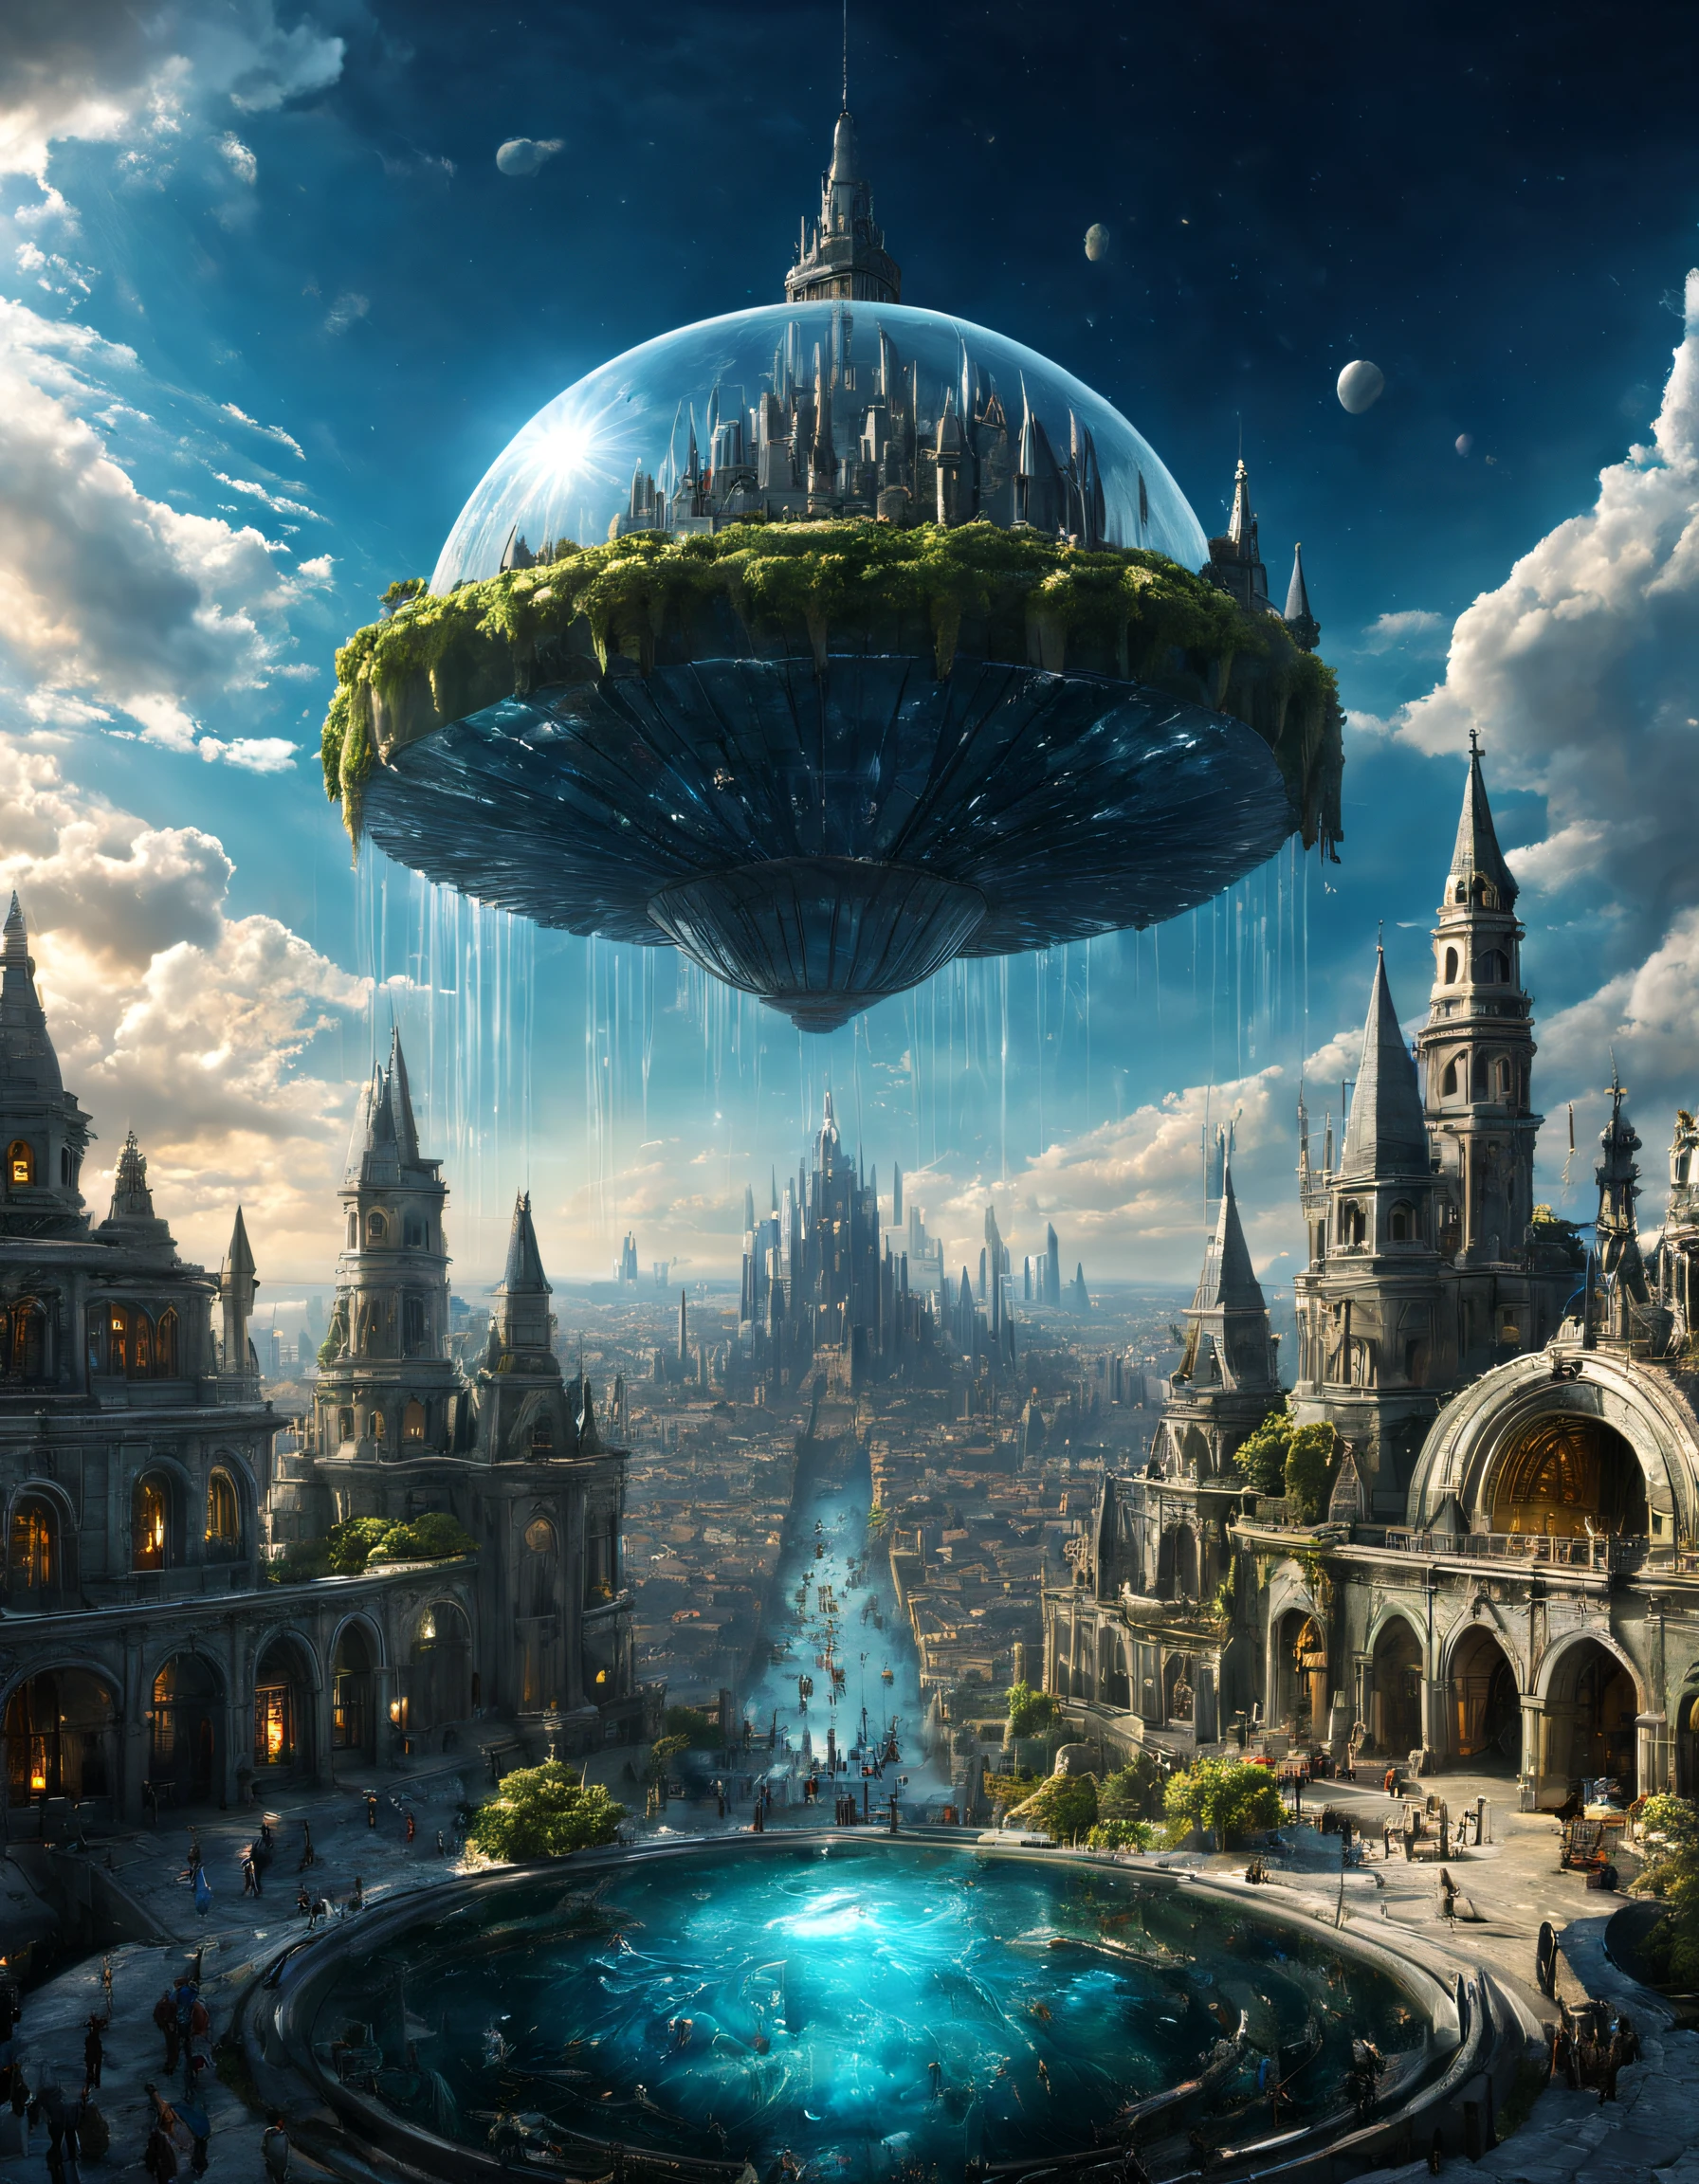 artistic and creative utopian world where humans living in harmony and peace with flora and fauna, an imagination of artificial intelligence and singularity, intricated detailed, maximalist, perfect flowing energy, futuristic, utopian, highly detailed, futurepunk, amazing depth, hyperdetailed masterwork by head of prompt engineering